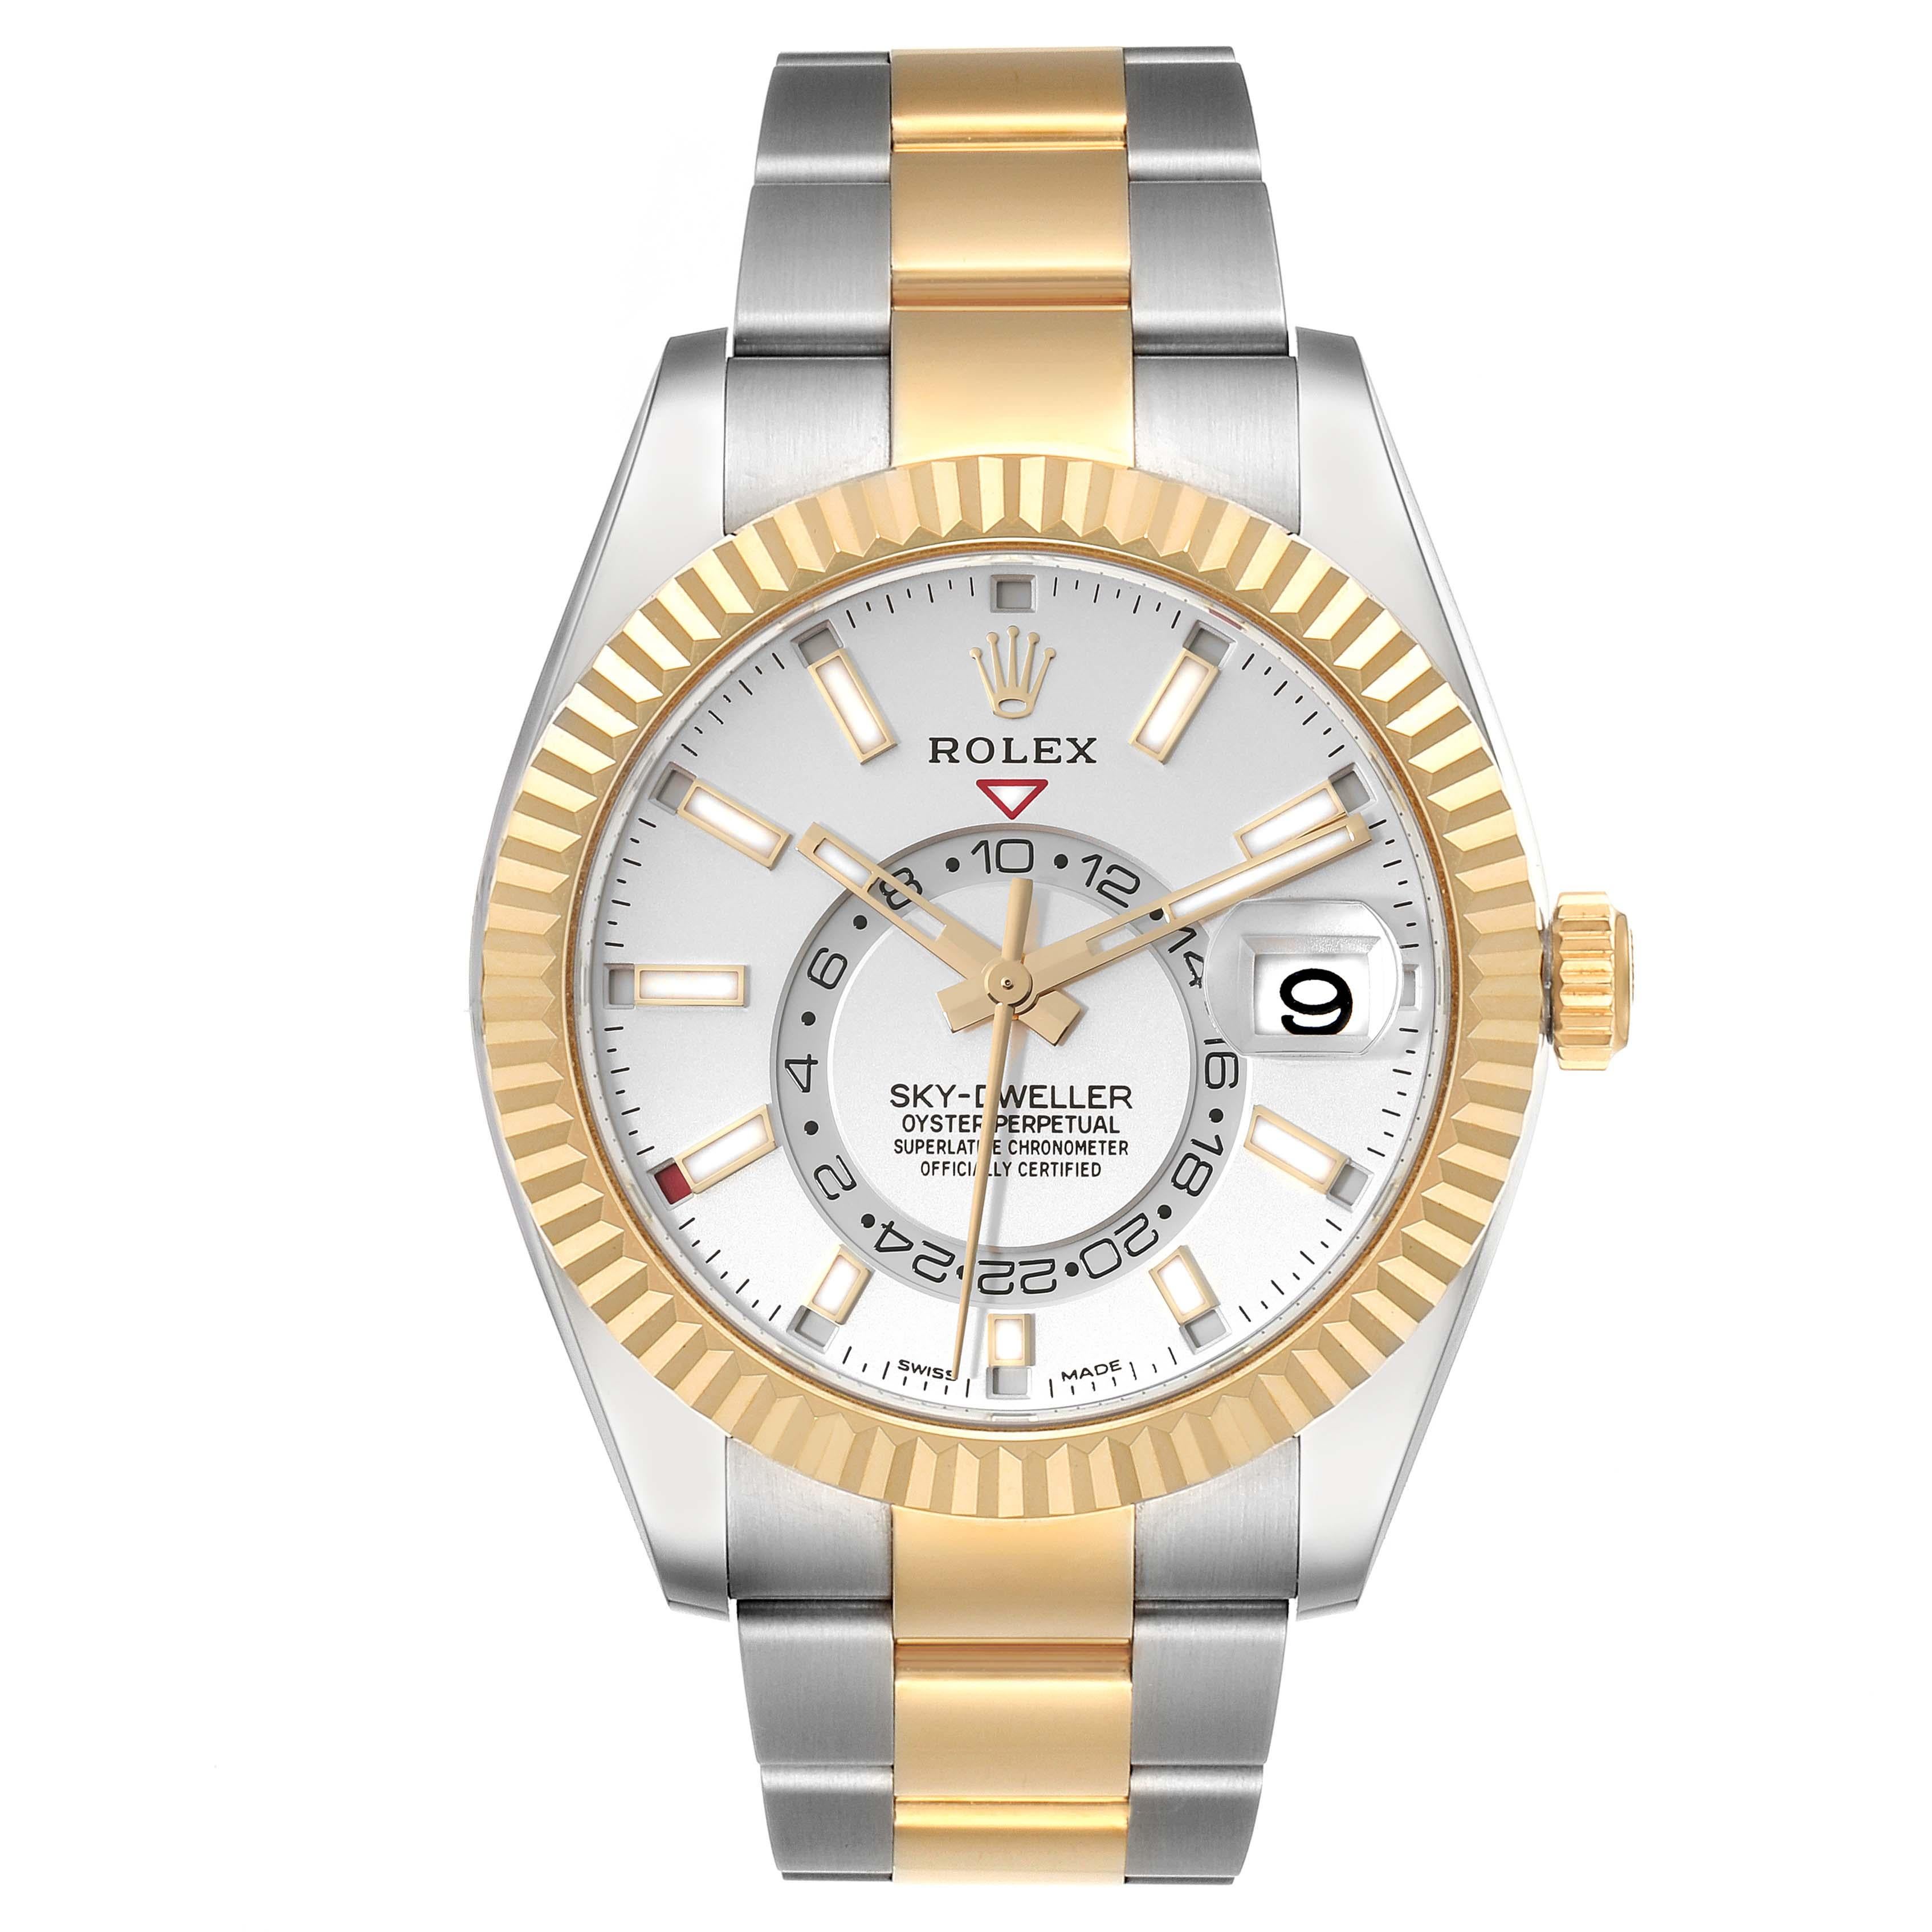 Rolex Sky Dweller Yellow Gold Steel White Dial Mens Watch 326933 Box Card. Officially certified chronometer automatic self-winding movement. Dual time zones, annual calendar. Paramagnetic blue Parachrom hairspring. High-performance Paraflex shock